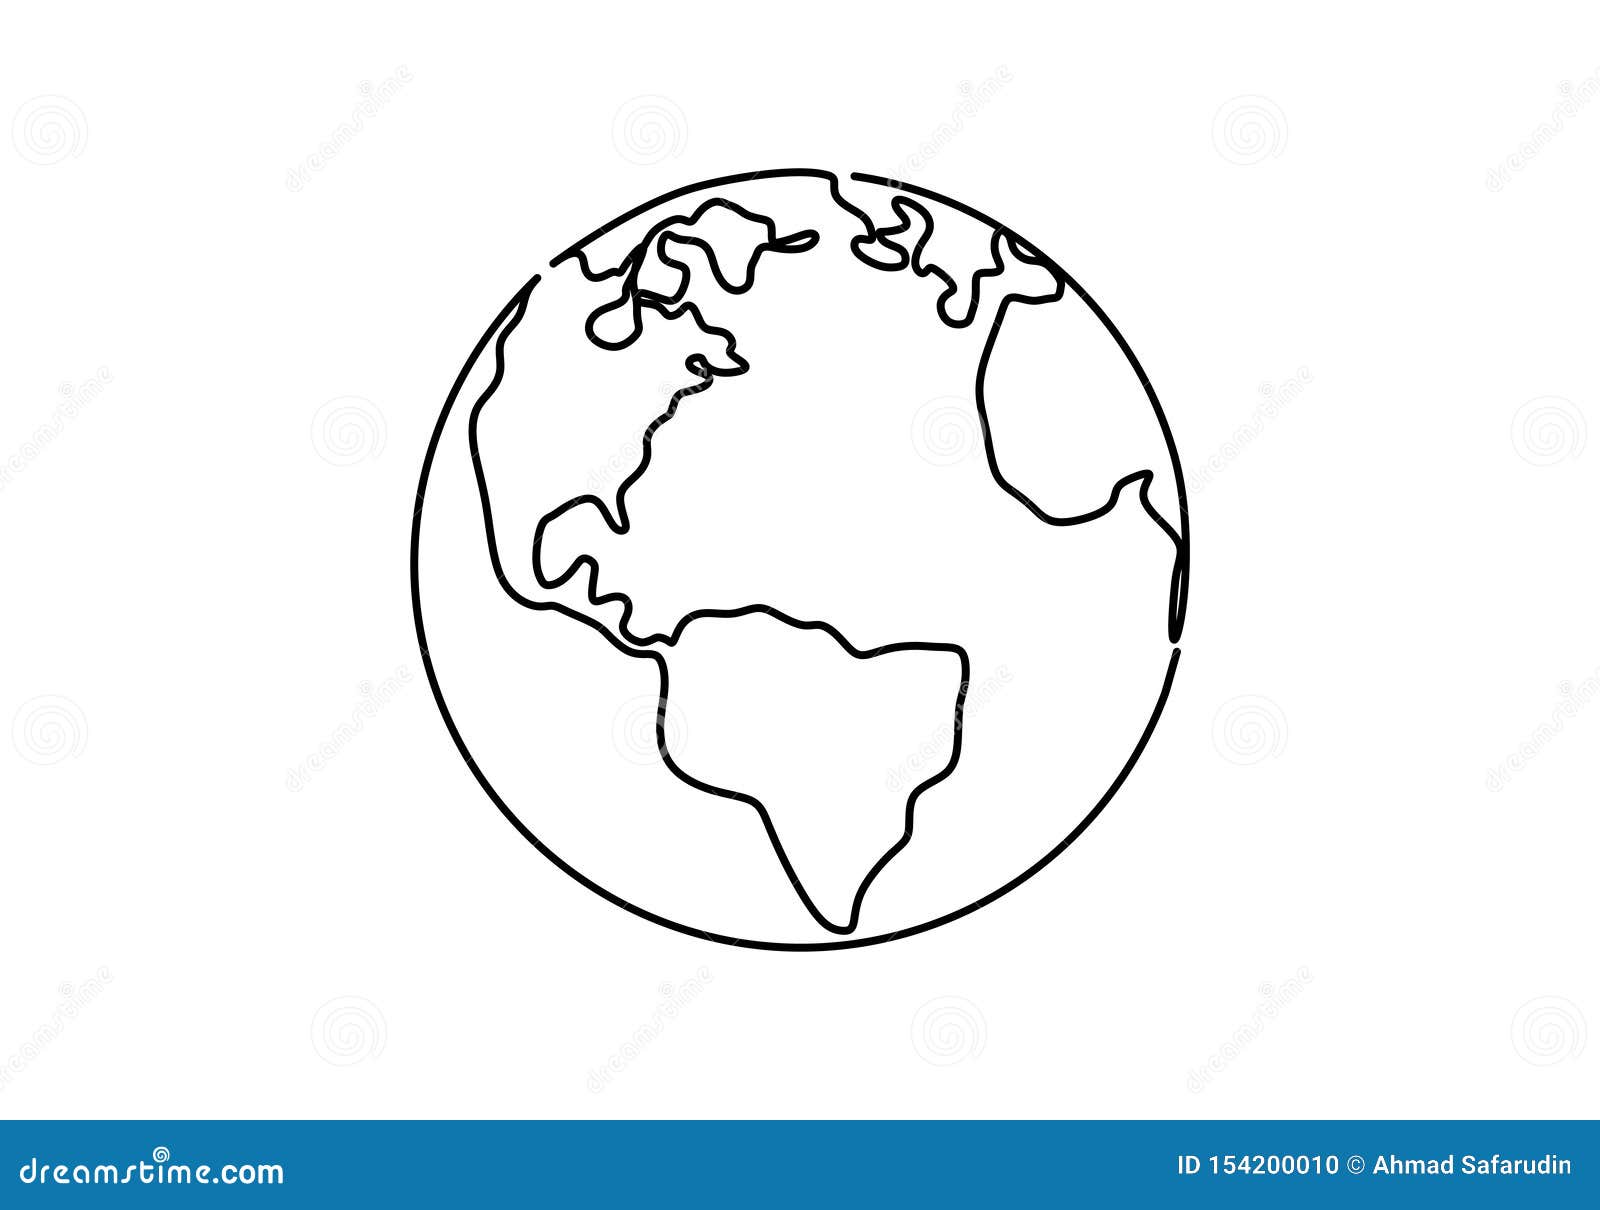 one line style world earth globe continuous . simple modern minimalistic style   on white background